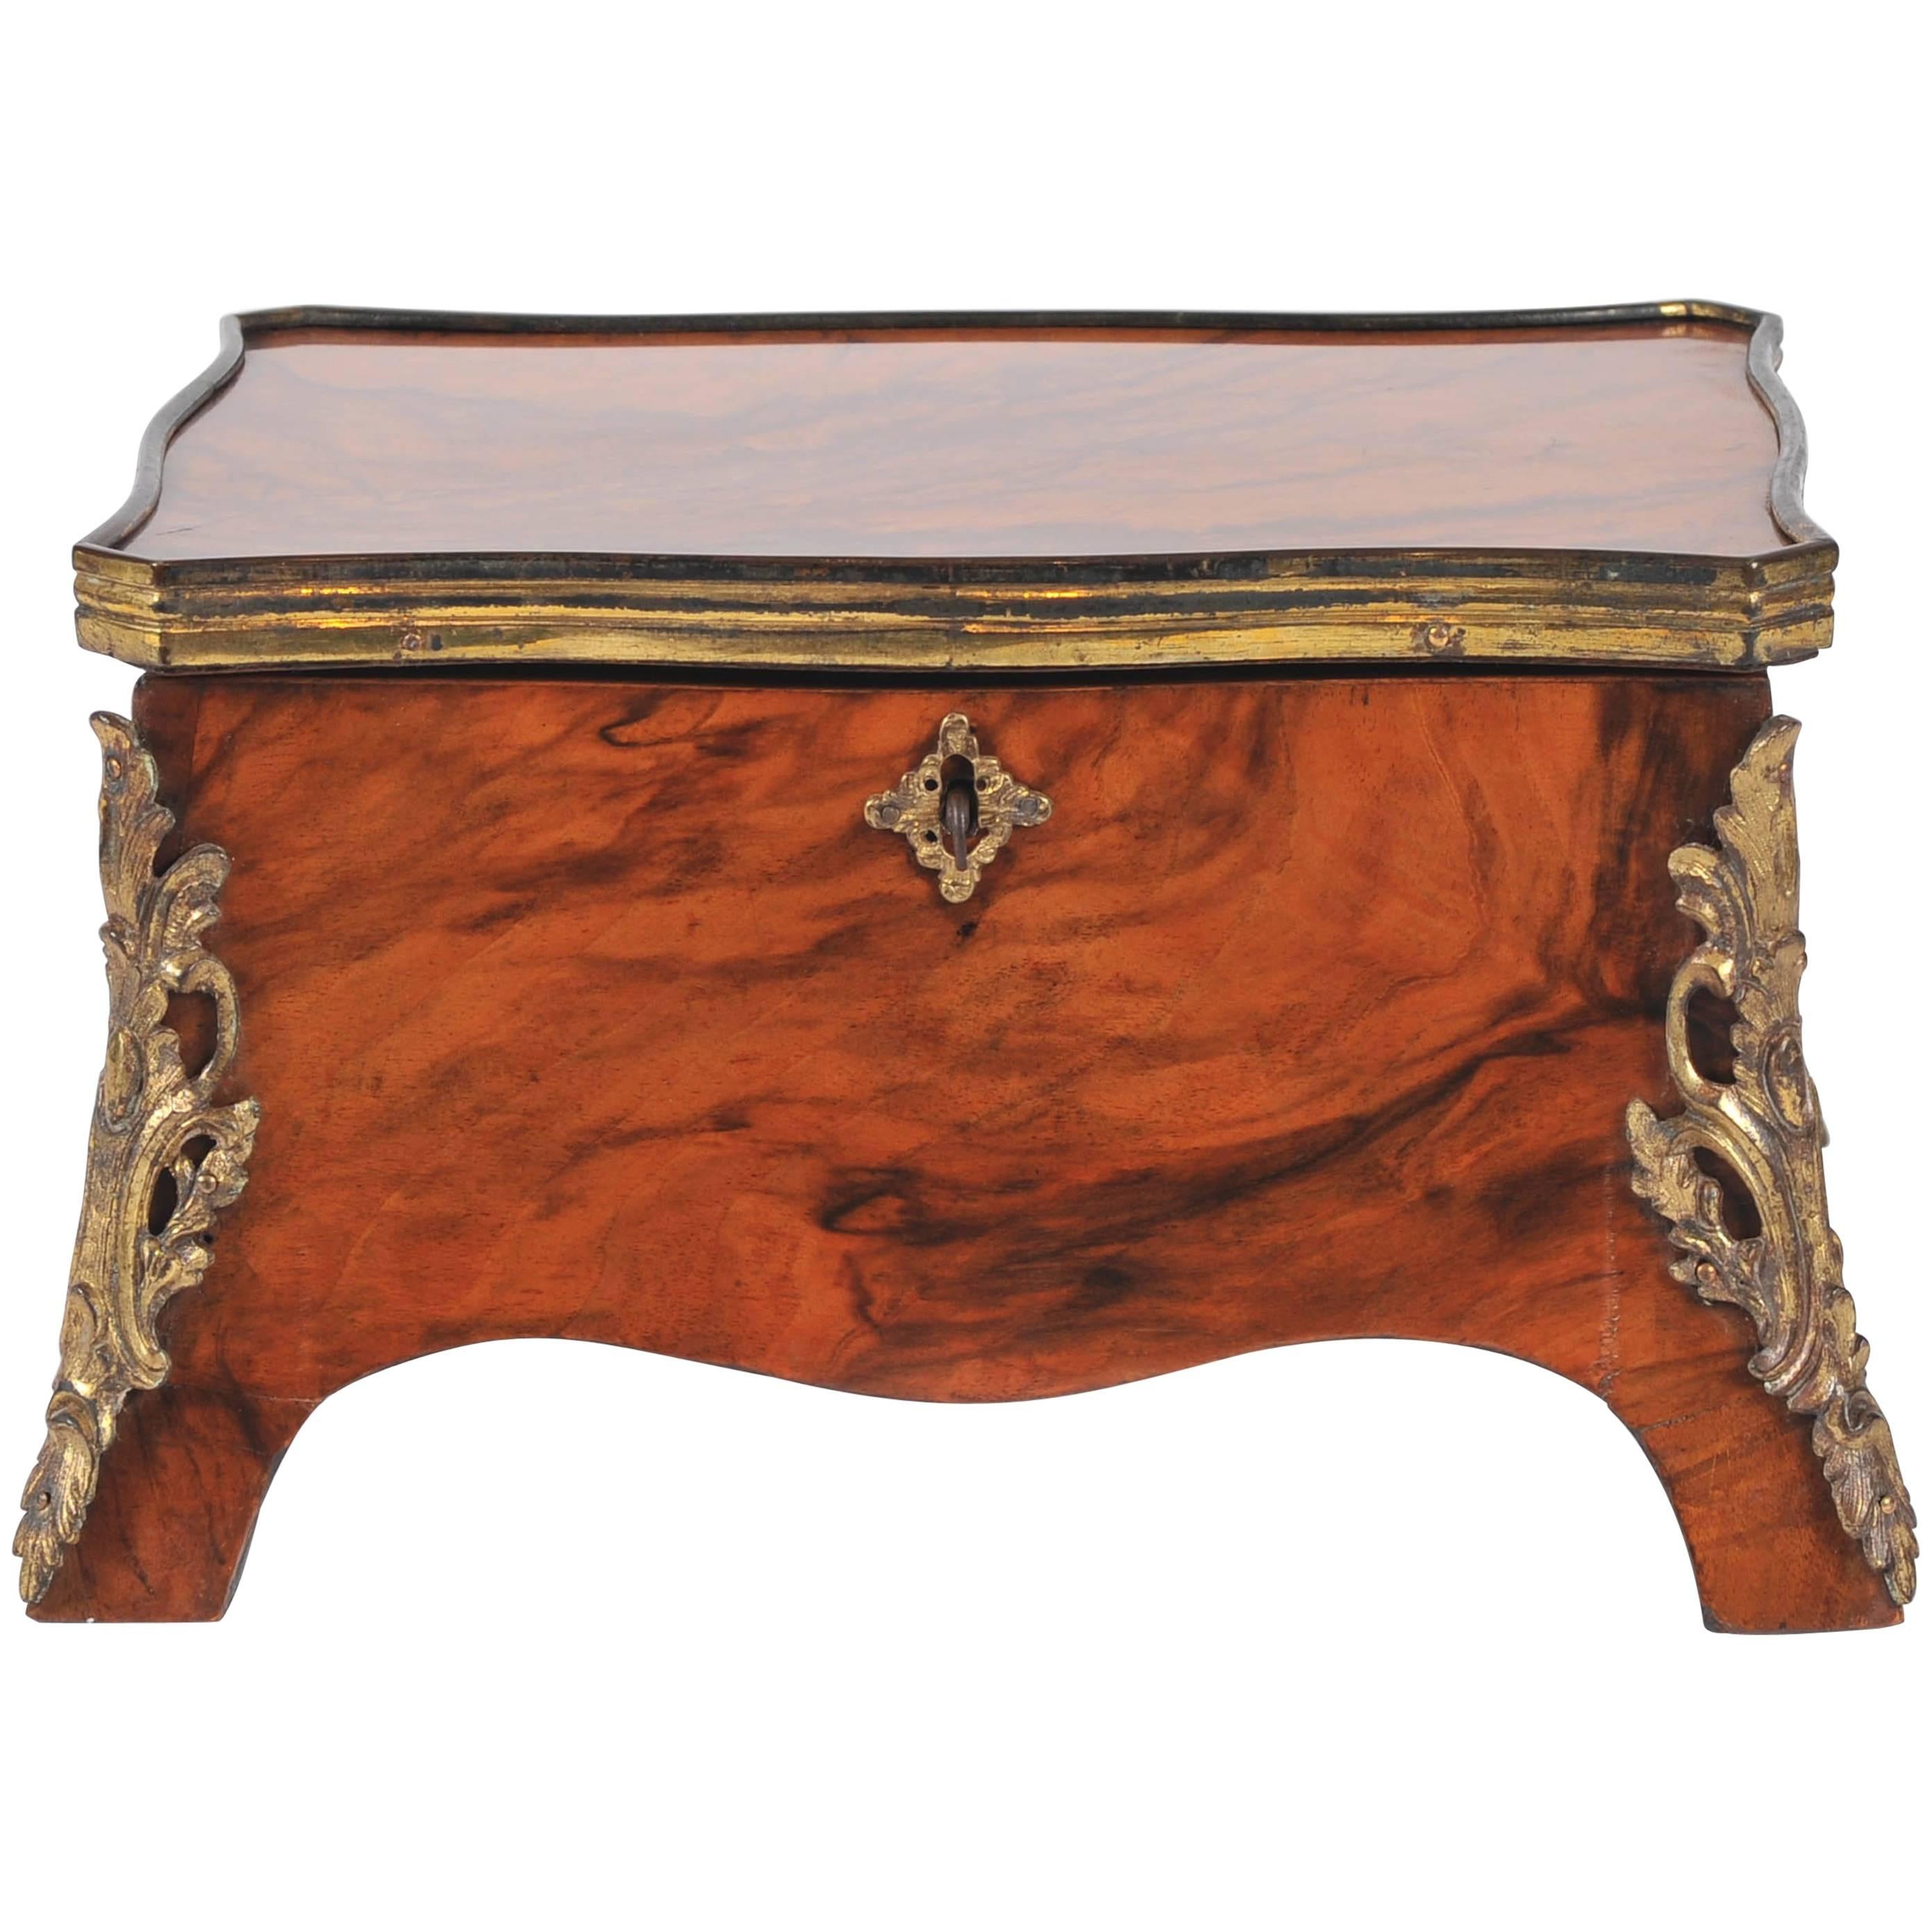 Mid-19th Century Decorative Box, Walnut and Ormolu Mounted, Grand Tour Style For Sale